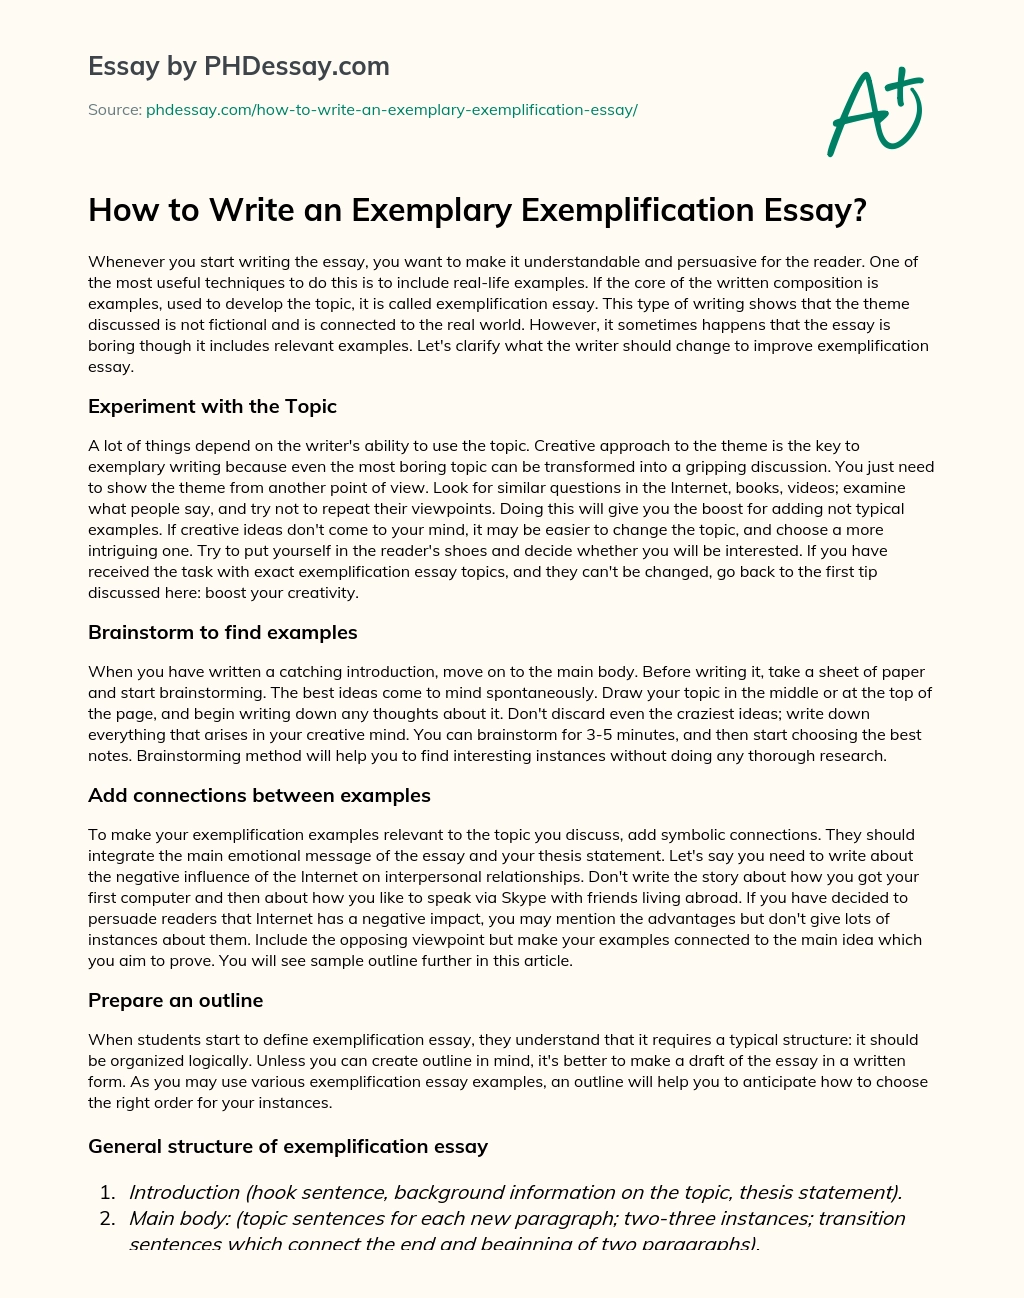 How to Write an Exemplary Exemplification Essay? essay